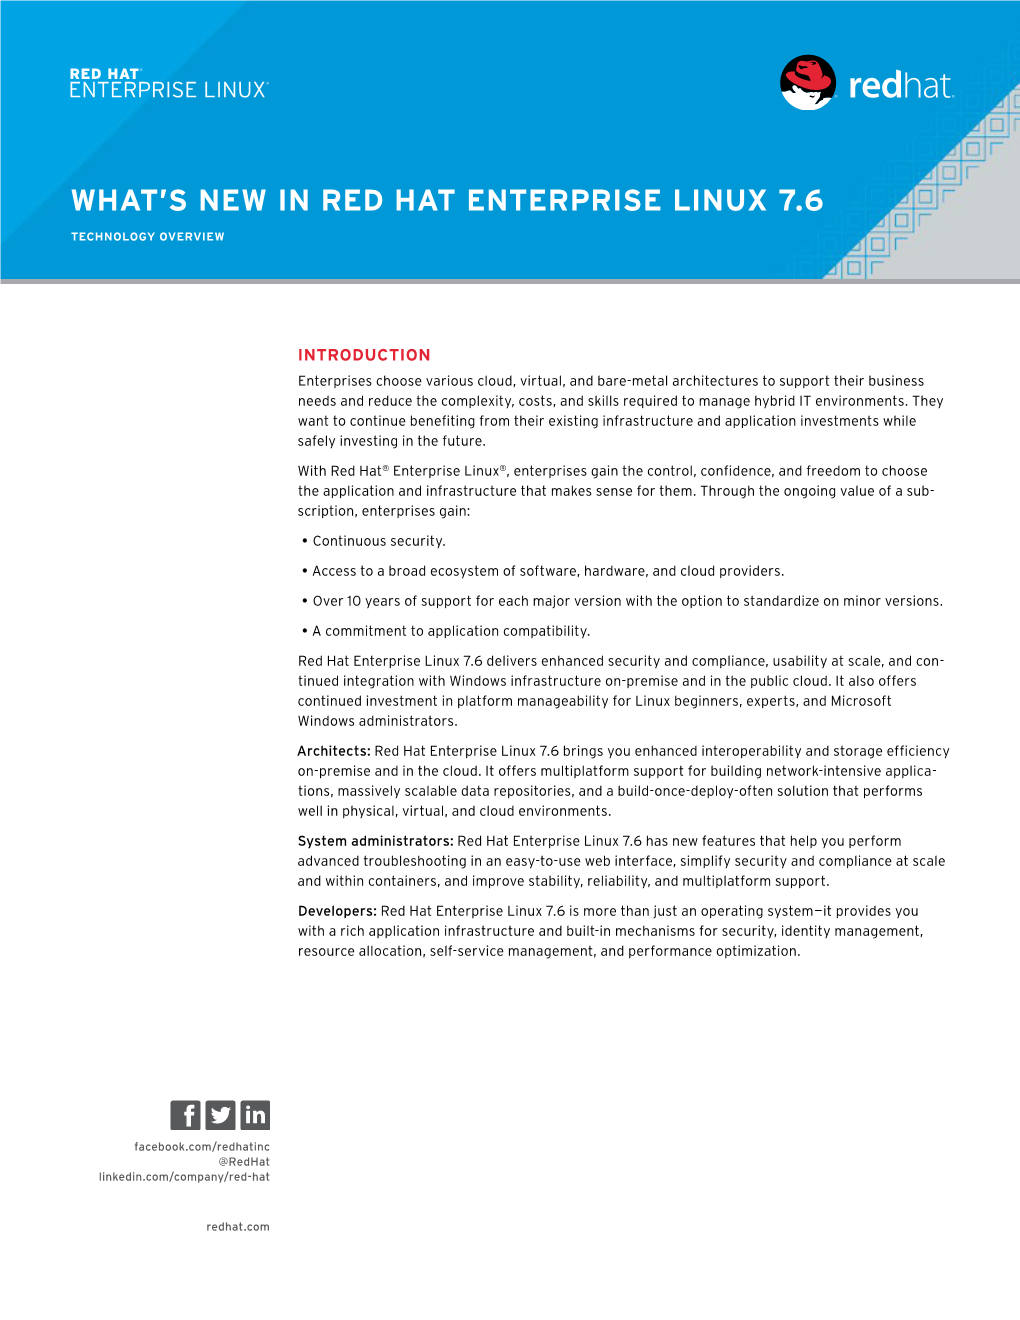 What's New in Red Hat Enterprise Linux